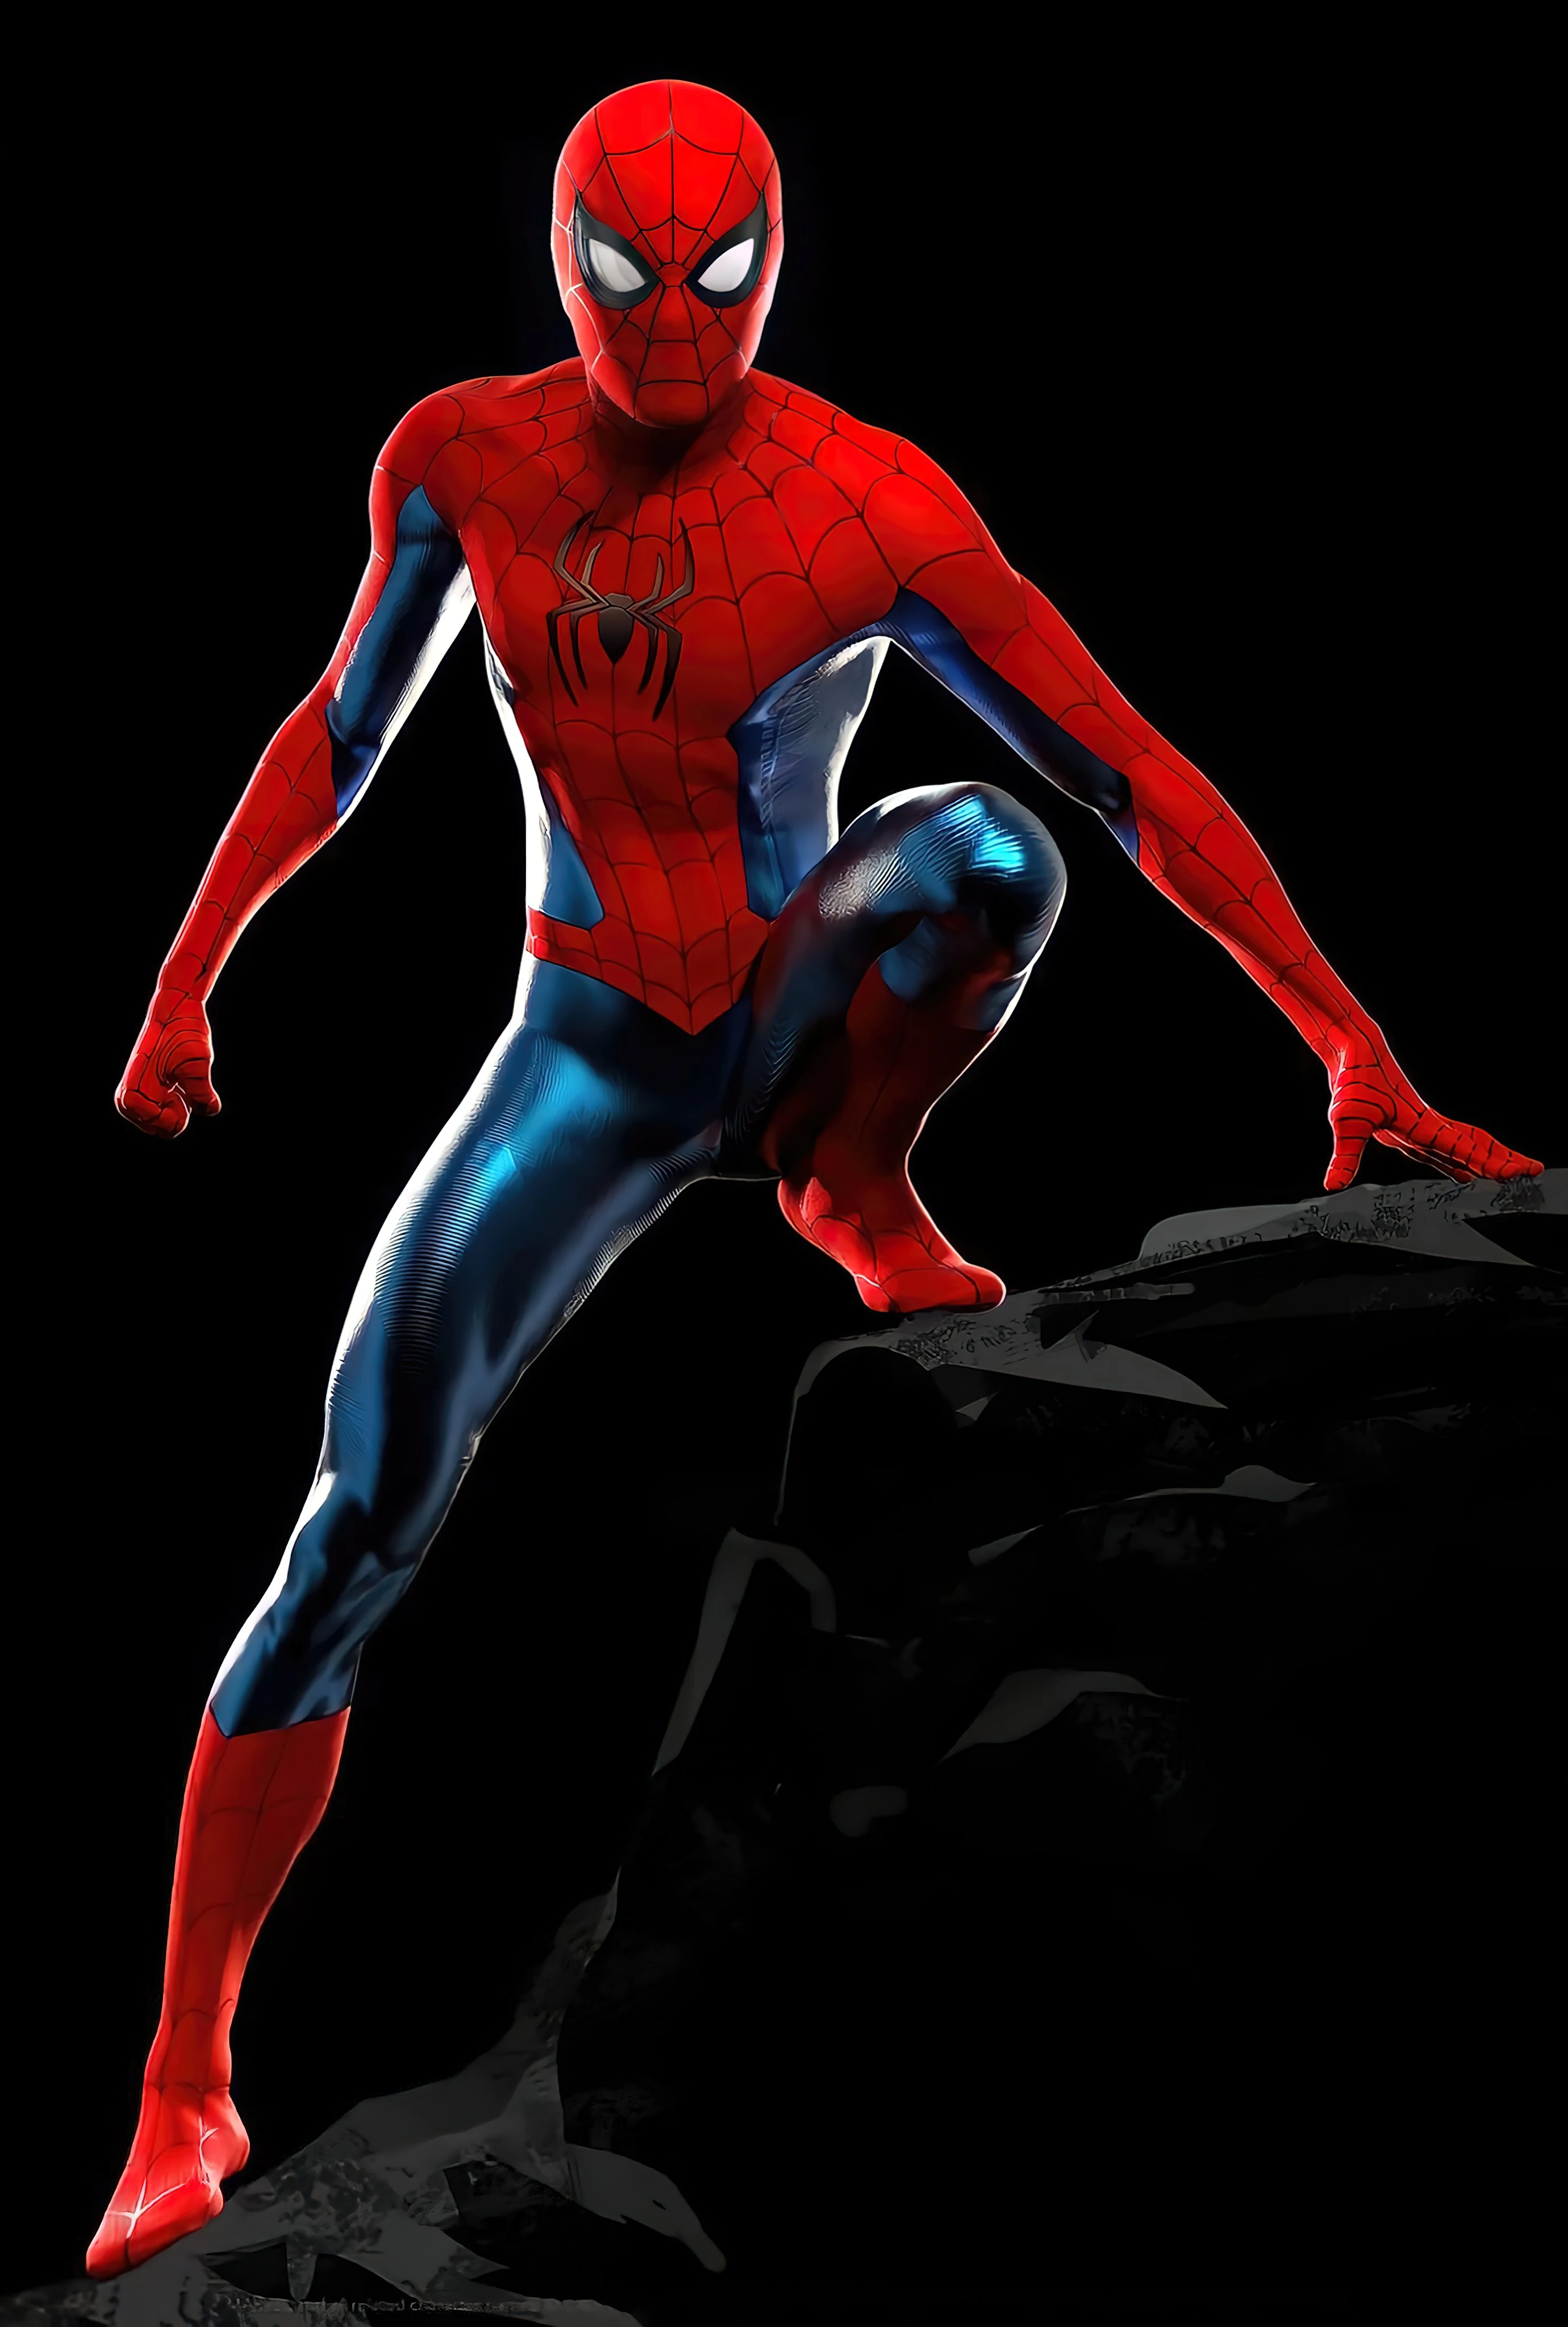 Spider-Man: Far From Home, Marvel Cinematic Universe Wiki